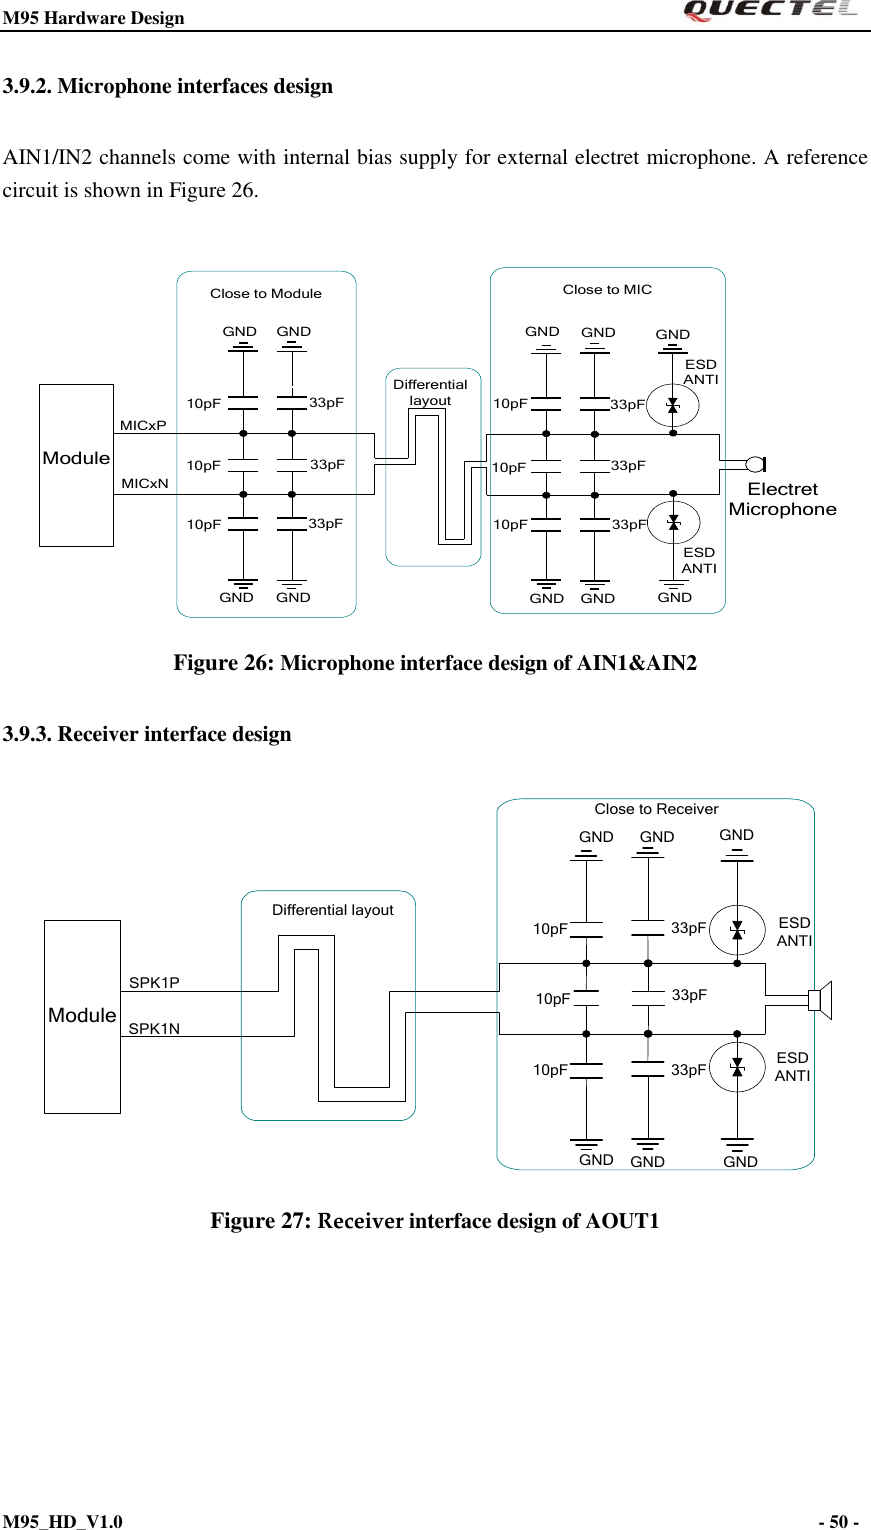 M95 Hardware Design                                                       M95_HD_V1.0                                                                - 50 -    3.9.2. Microphone interfaces design AIN1/IN2 channels come with internal bias supply for external electret microphone. A reference circuit is shown in Figure 26.    MICxPDifferential layoutModule 10pF 33pF33pF33pFGNDGNDElectret MicrophoneGNDGND10pF10pFGNDGNDESD ANTIESDANTI33pF10pFClose to ModuleMICxNGNDGNDGNDGND10pF 33pF33pF10pFClose to MIC Figure 26: Microphone interface design of AIN1&amp;AIN2 3.9.3. Receiver interface design SPK1PSPK1NDifferential layout10pF10pF33pF33pF33pFGNDGND10pFESD ANTIESD ANTIModuleClose to ReceiverGNDGNDGND GND Figure 27: Receiver interface design of AOUT1  